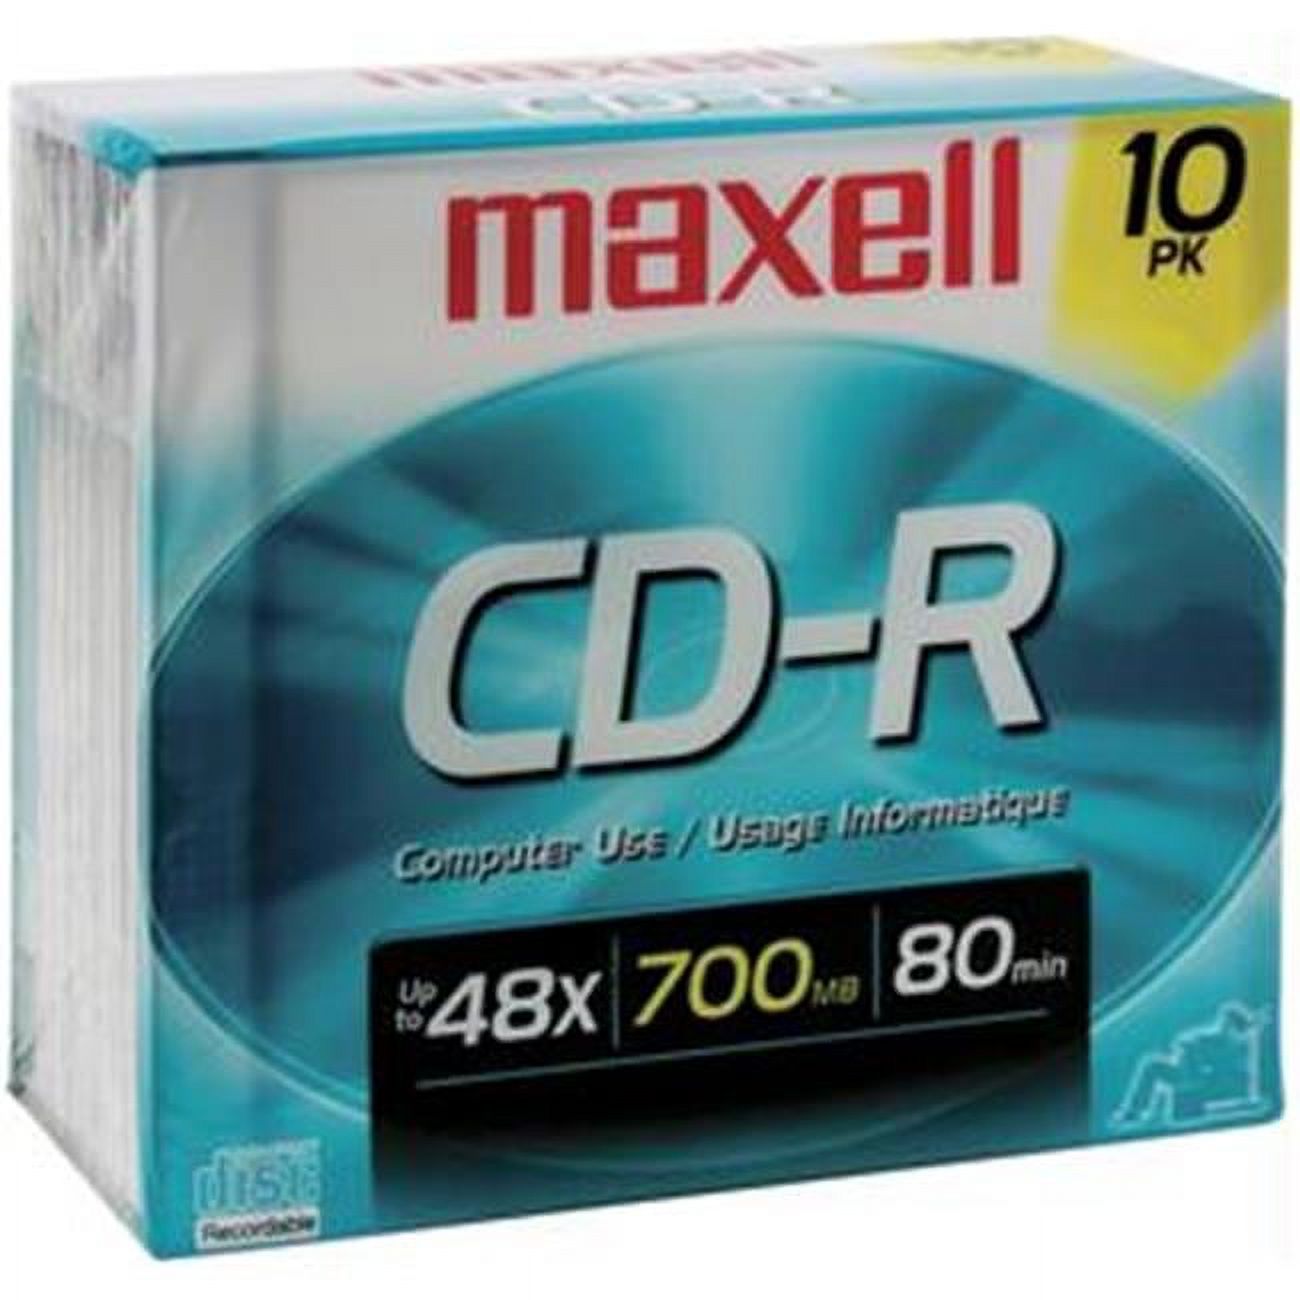 MAXELL 622860/648210 80-Minute/700 MB CD-R 622860/648210 - image 1 of 2